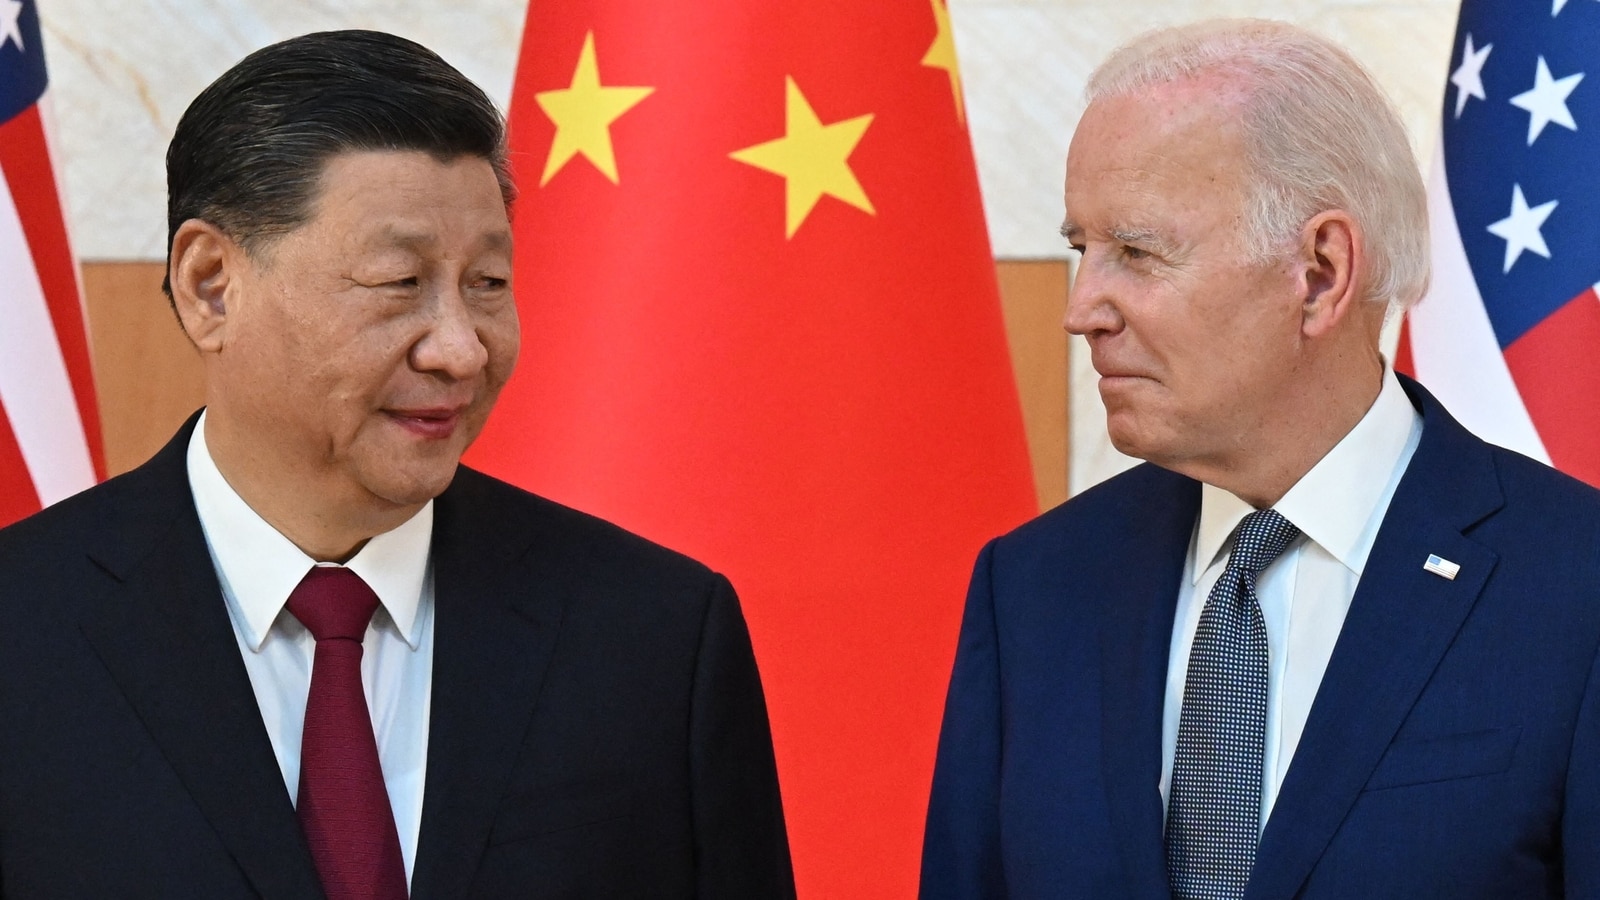 Biden discusses Taiwan with Xi Jinping on phone call, gets 'uncrossable red line' reply